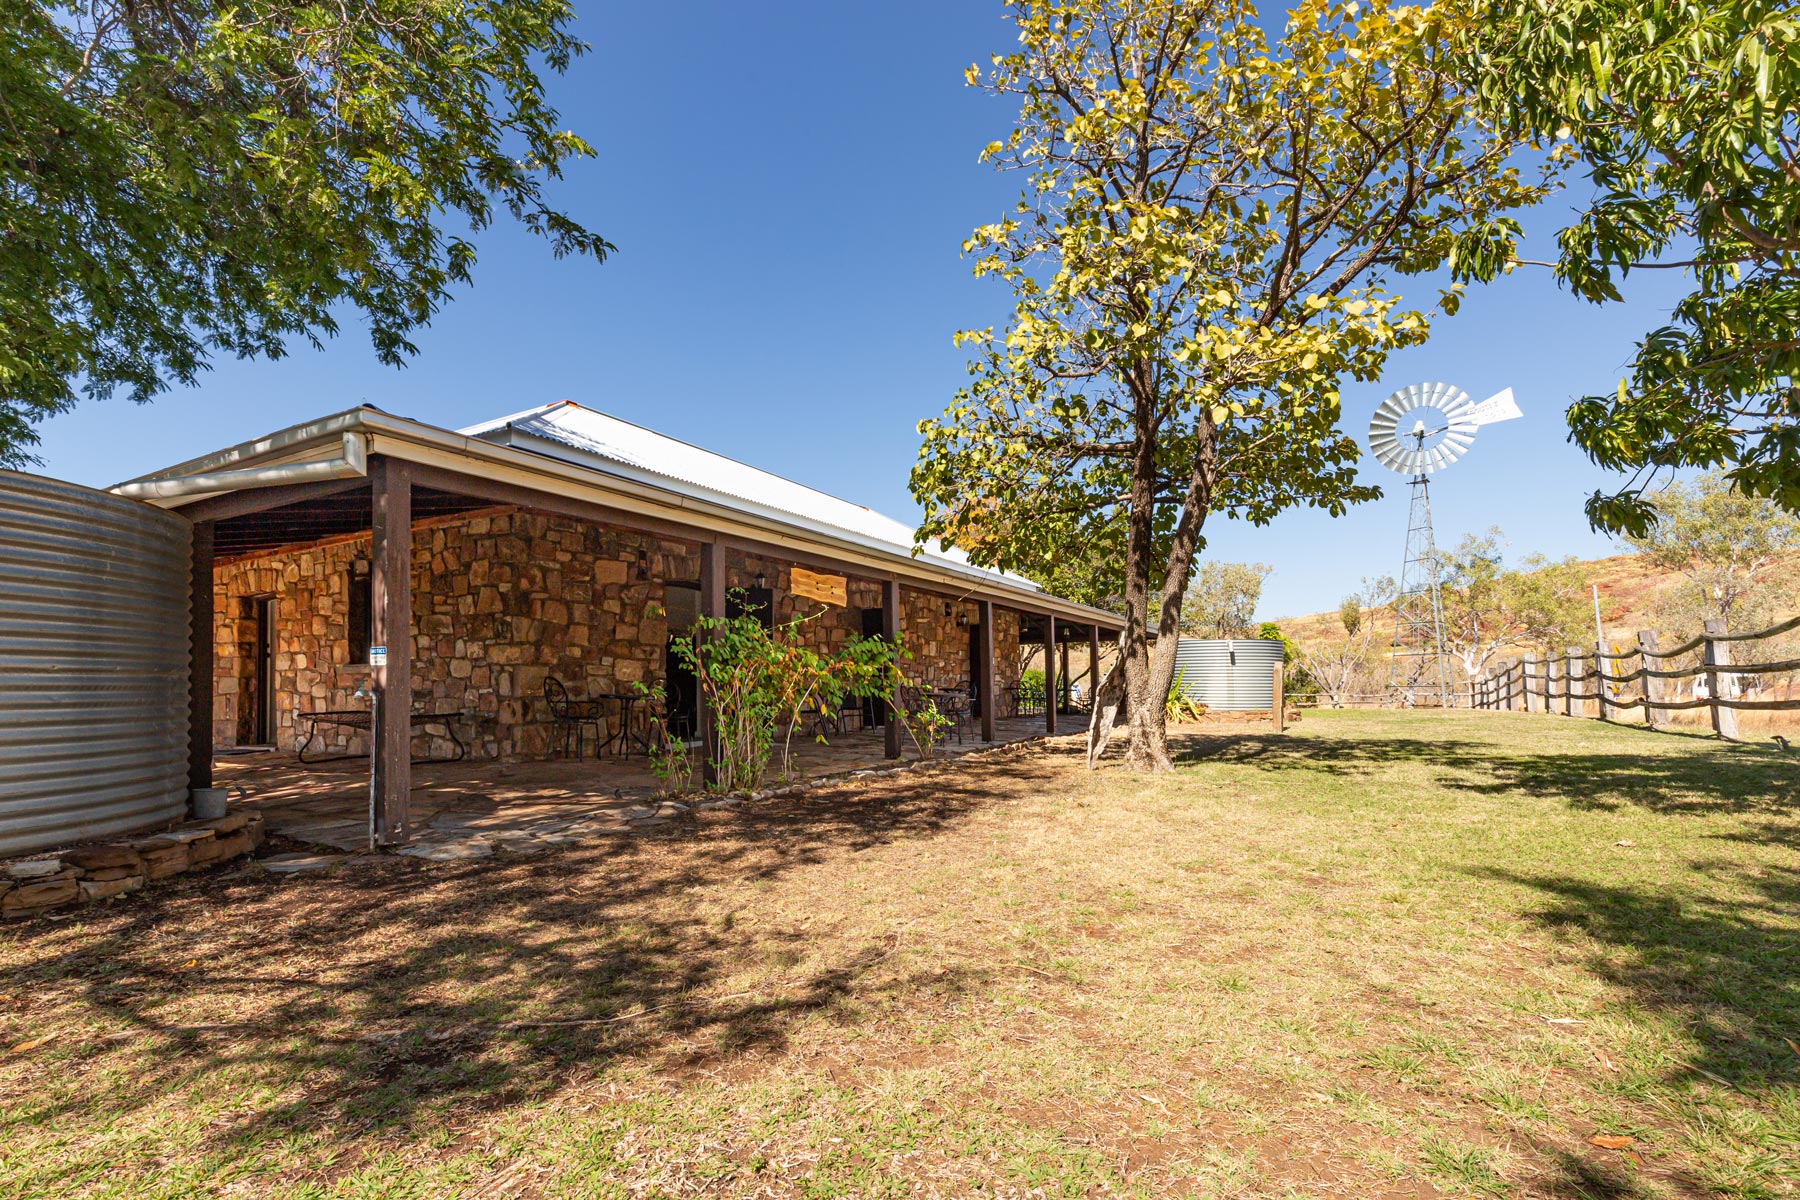 The old Durack Homestead Museum